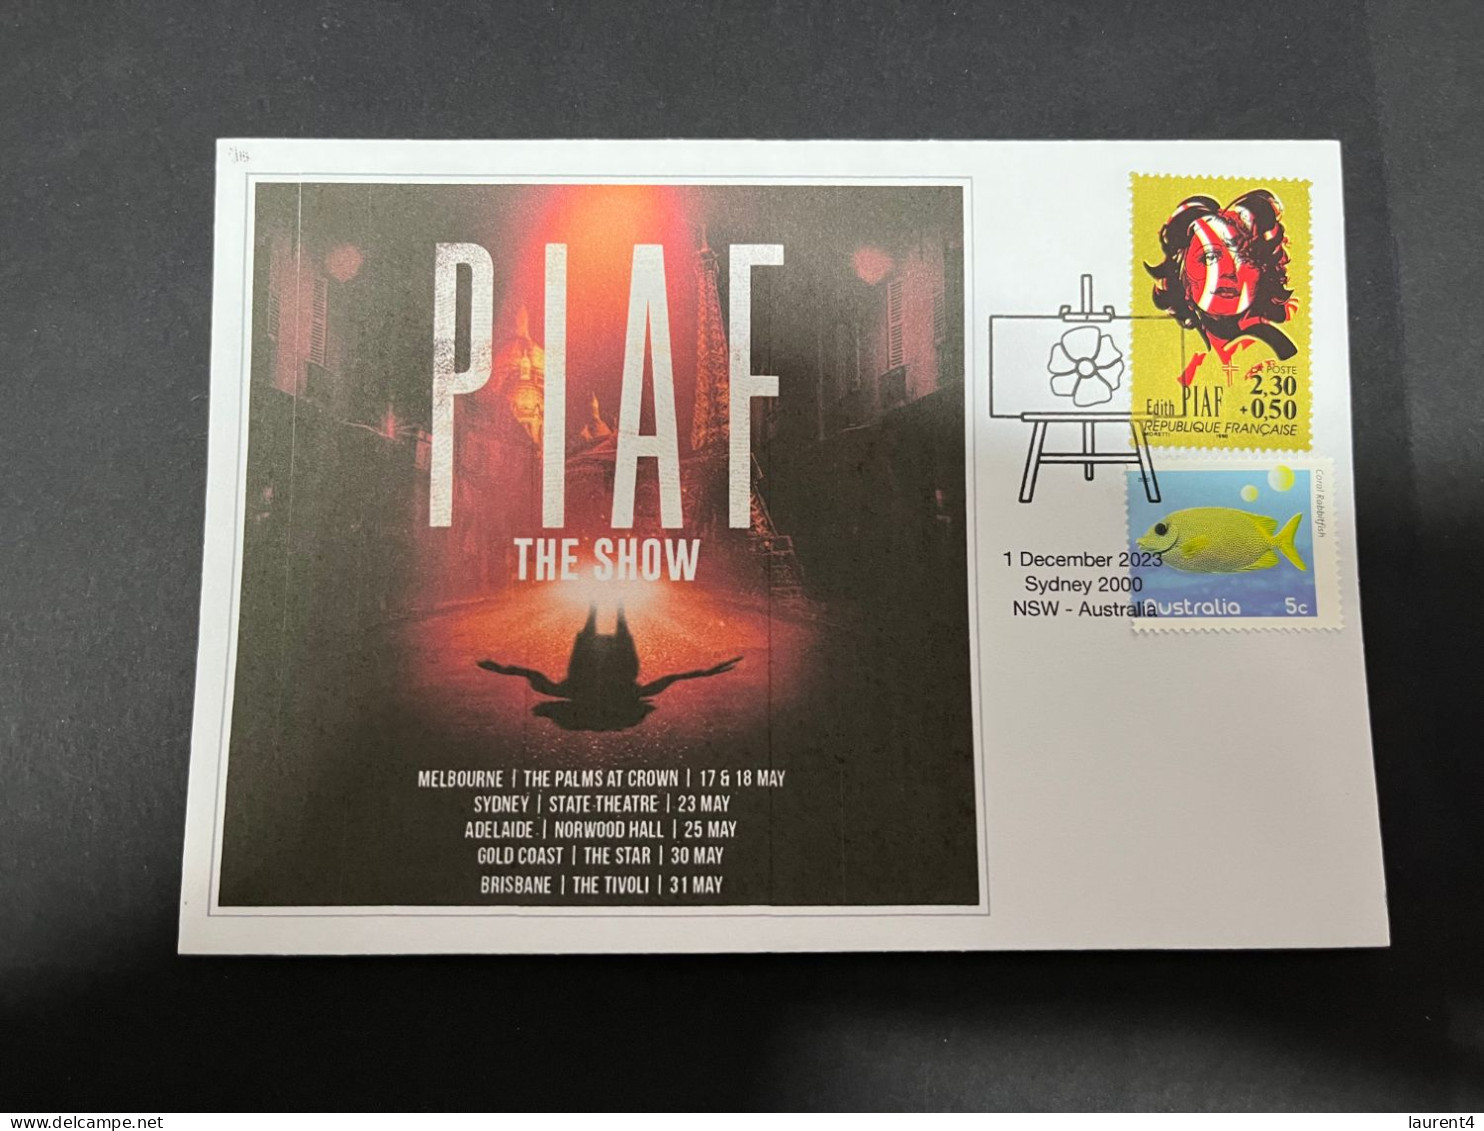 5-12-2023 (1 W 23) New Edith Piaf Six Concert Shows Anounced In Australia During May 2024 - With Edith Piaf Stamp - Sänger